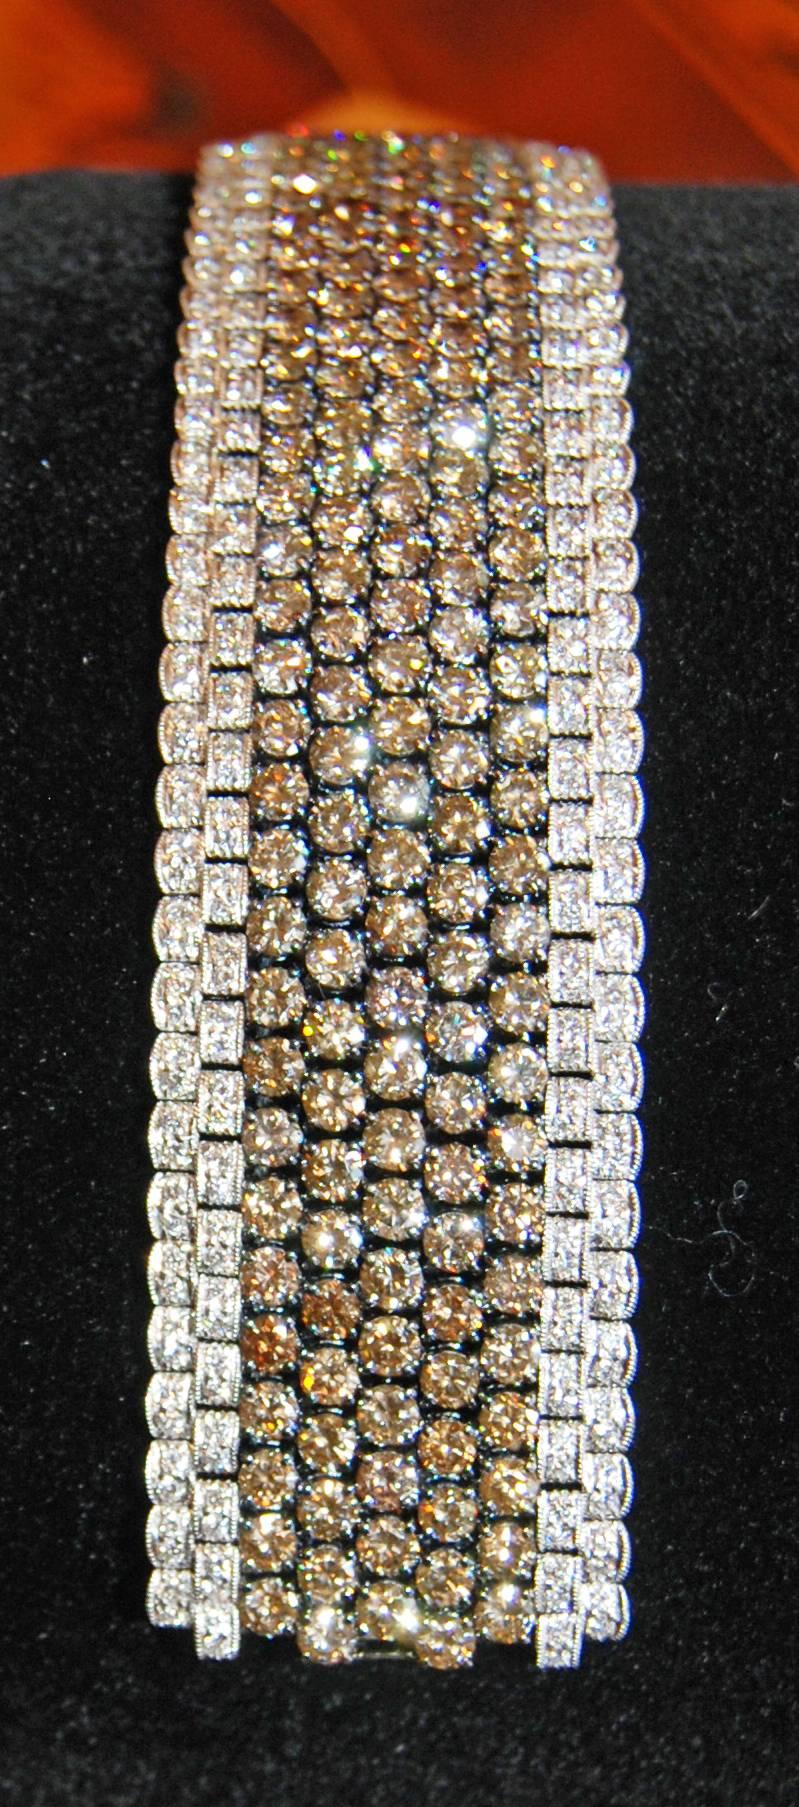 18K White Gold bracelet featuring Brown, Yellow and White Diamonds Throughout with Pave Accents and an Invisible Clasp.

24.50tw Fancy Brown Round Brilliant Diamonds  SI1-2
5.64ctw White Round Brilliant Diamonds Near Colorless  
.10 Round